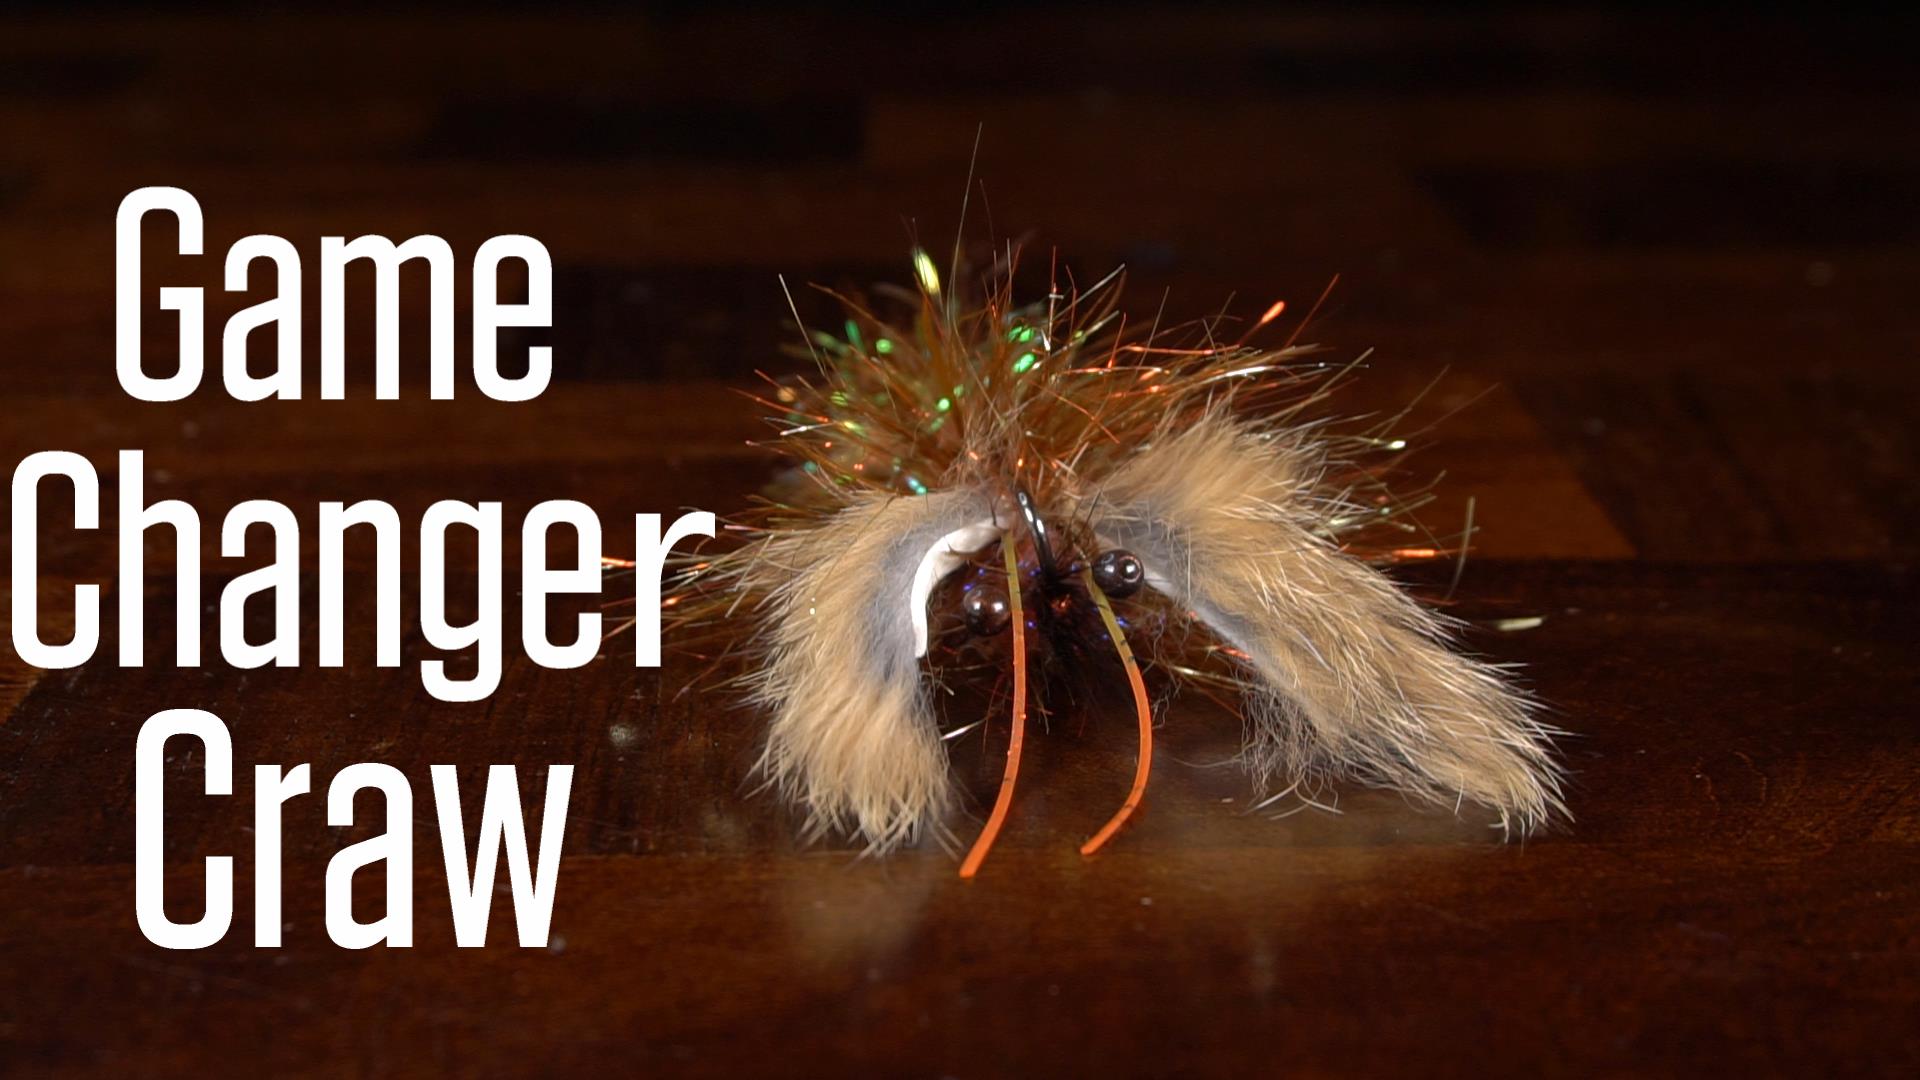 Brown Trout - Bucktail Game Changer